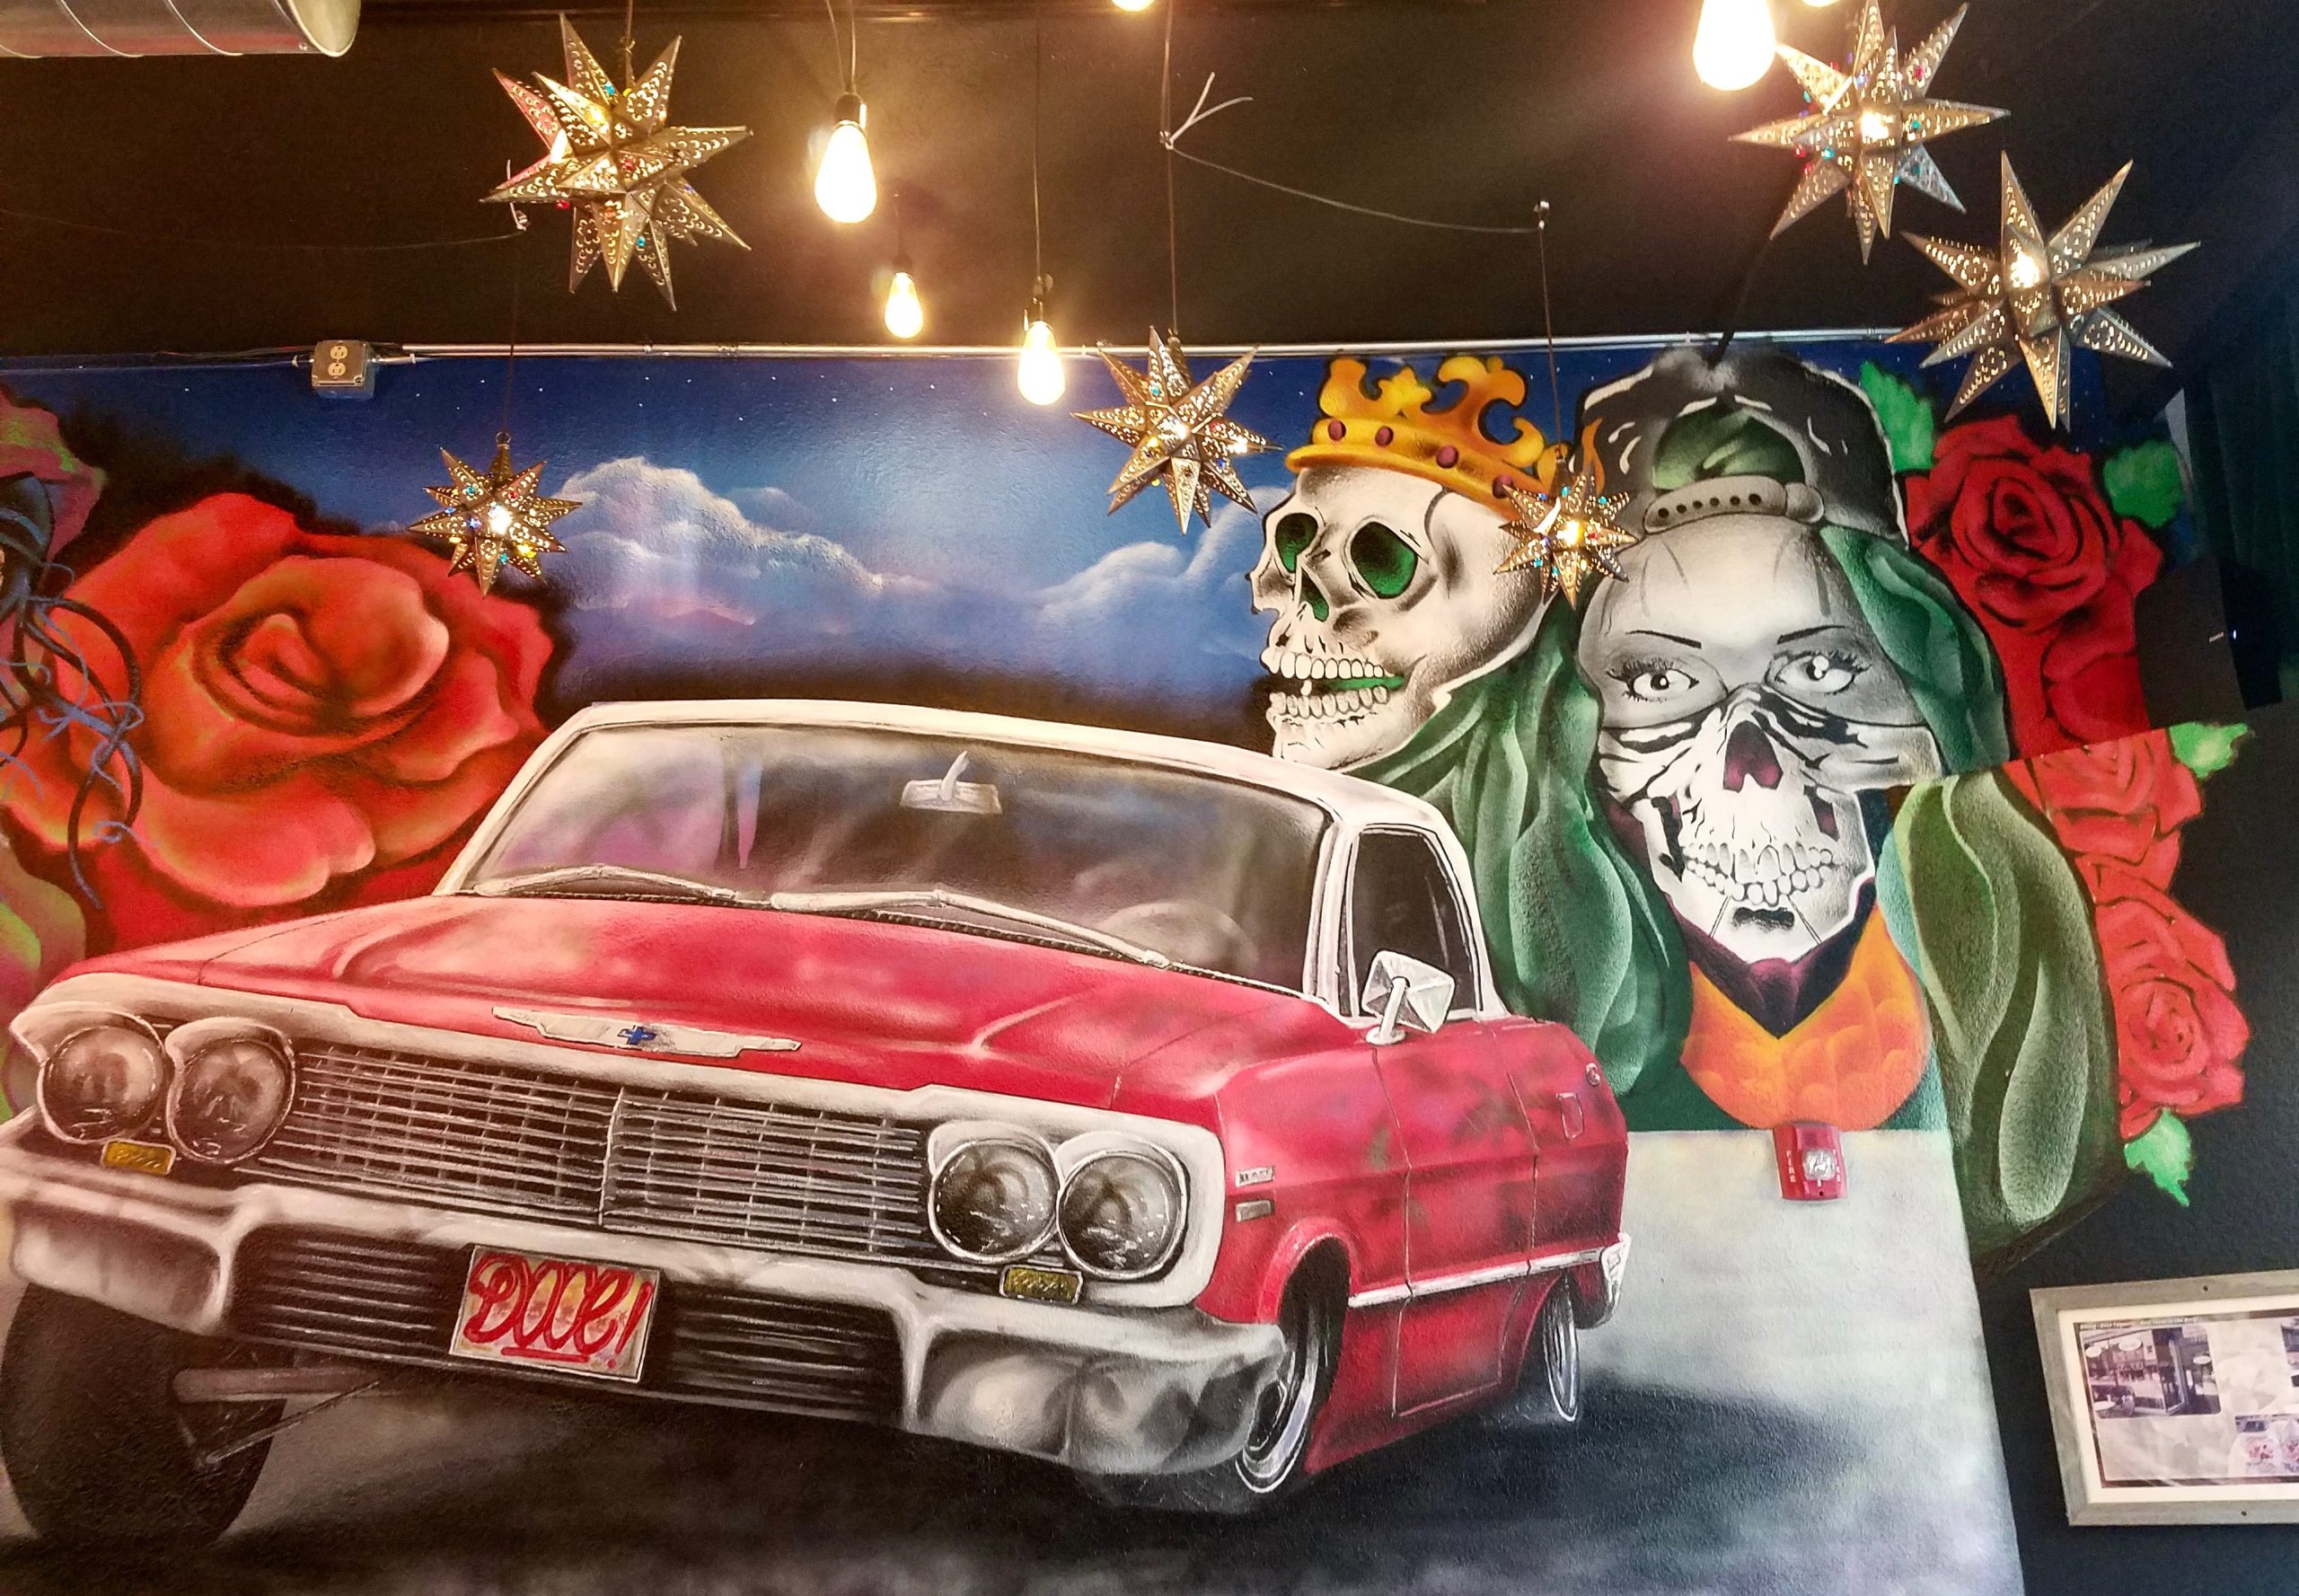 Apocalypse Not! This is taco imagery, adorning the wall at Doce Taqueria, a suggested spot for low-cost dining. (photo: Rick Handler)